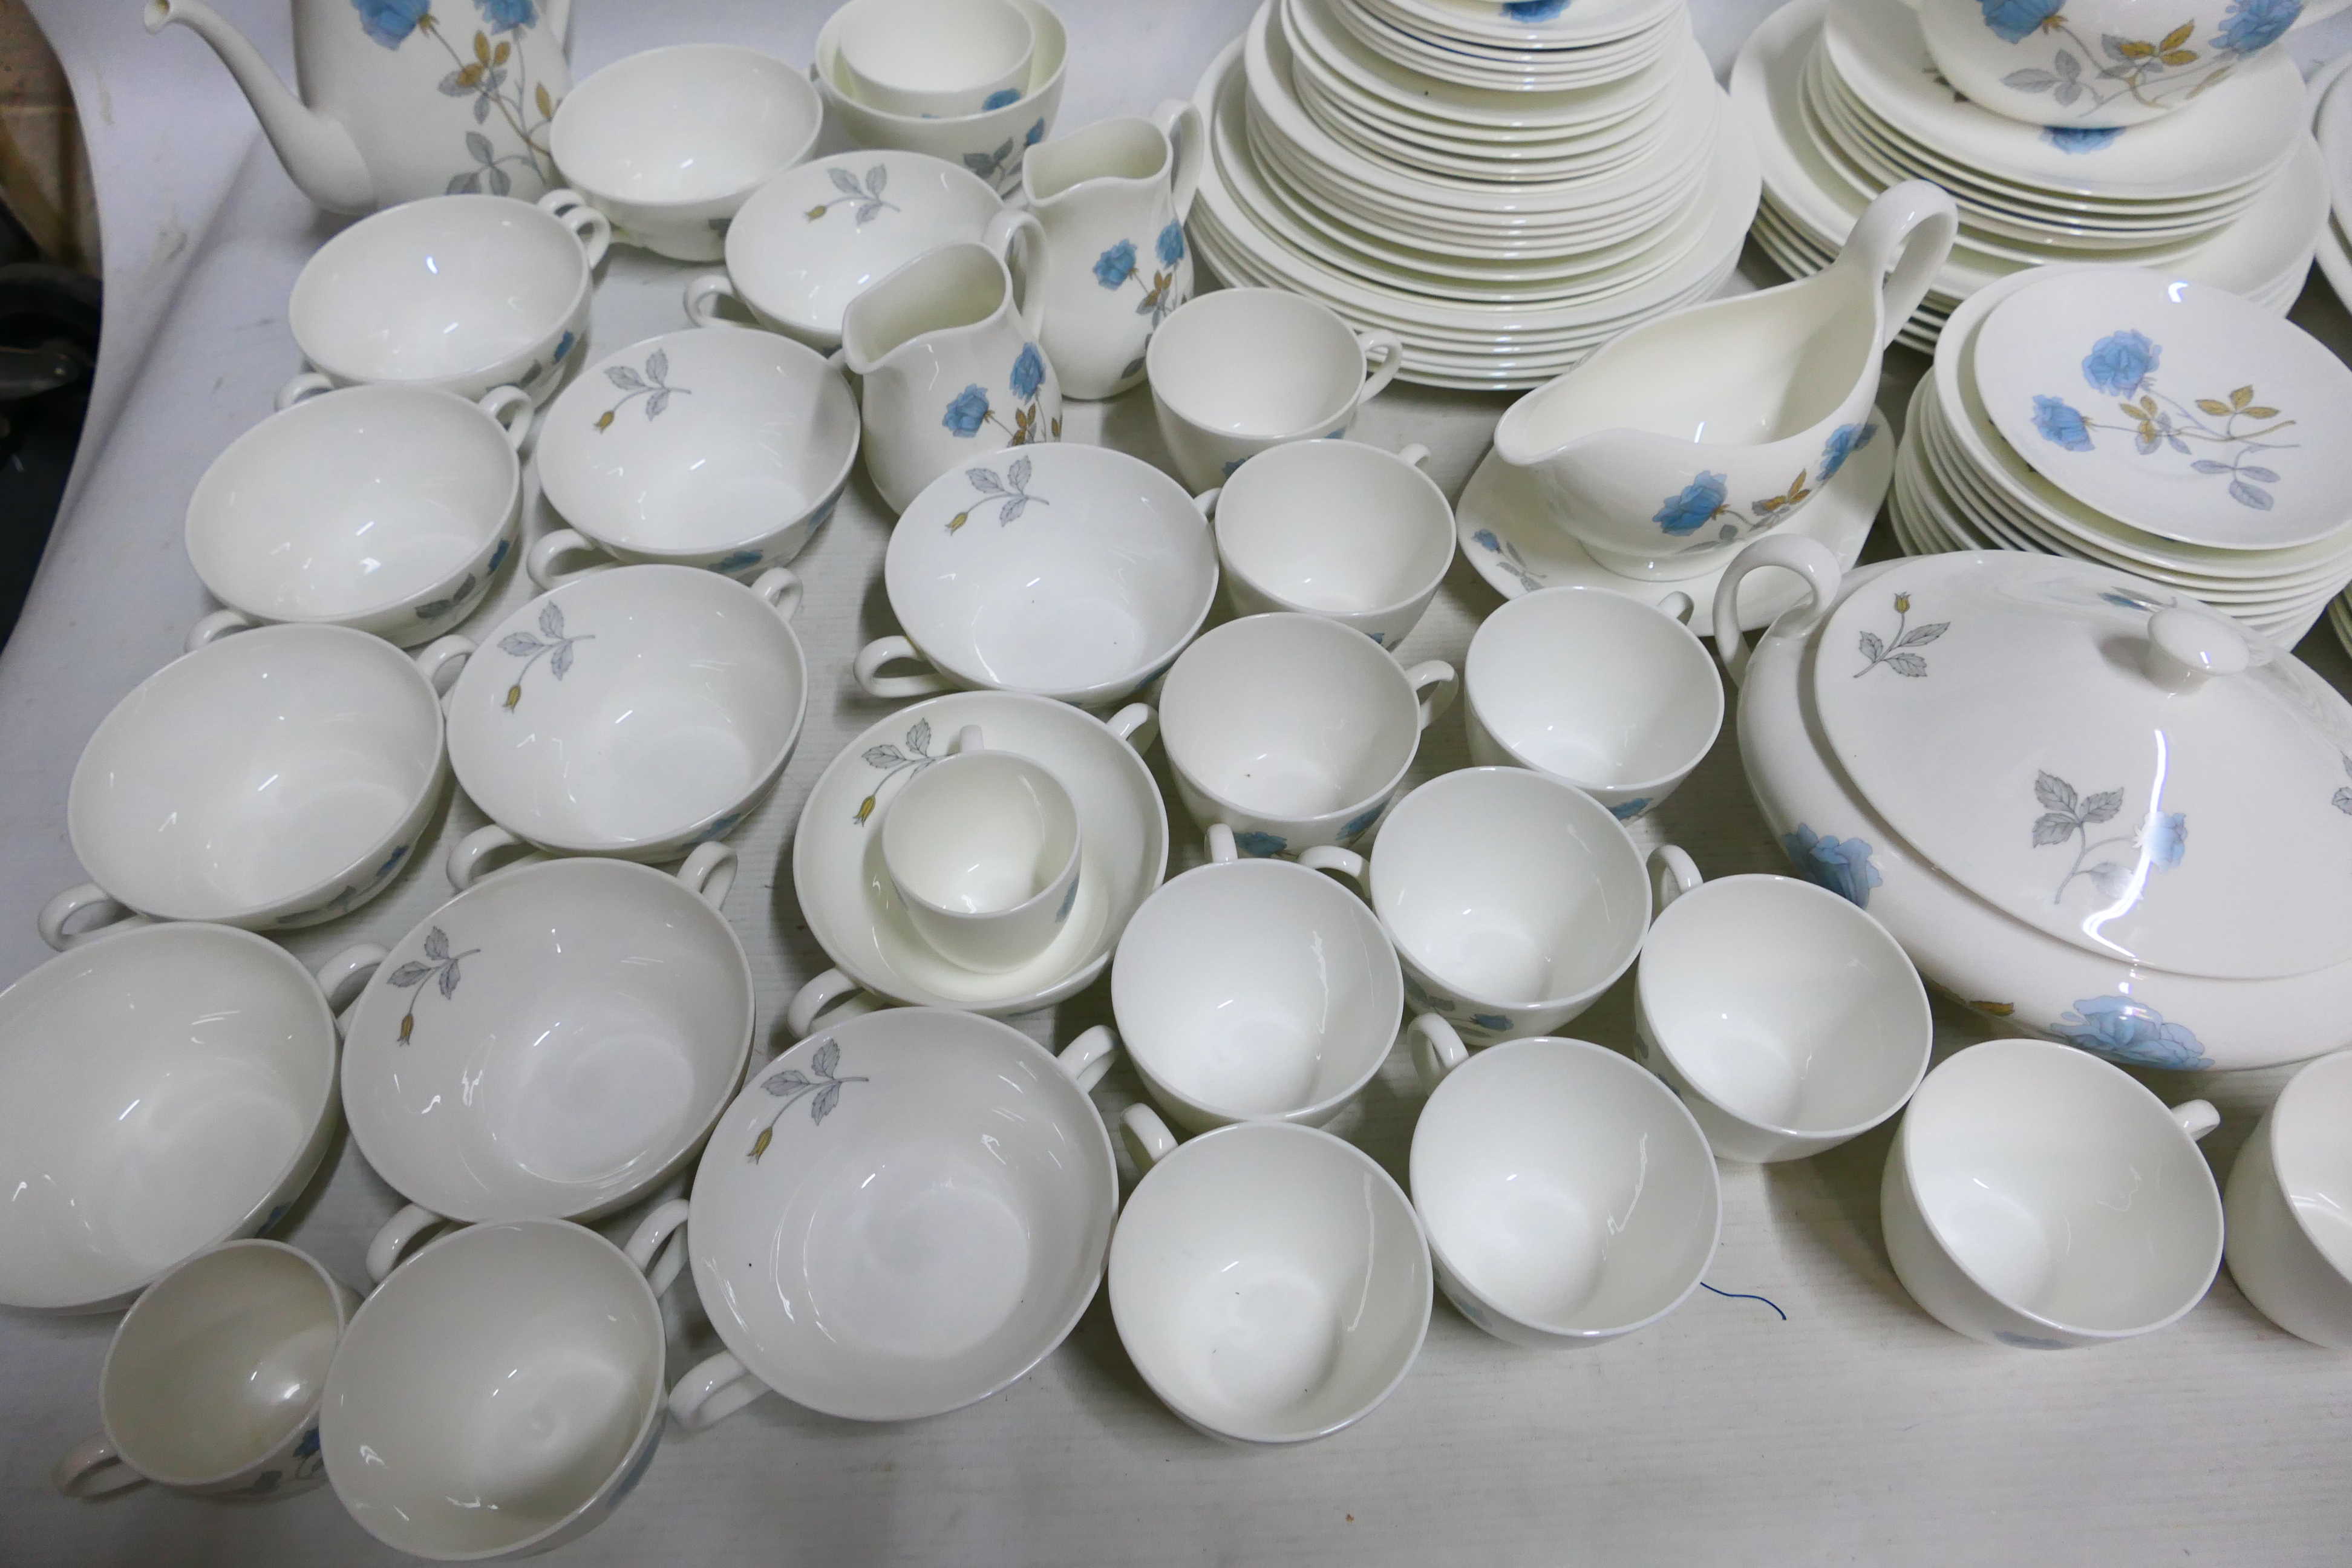 Wedgwood - A large Wedgwood Ice Rose dinner/tea set - Pieces include soup bowls, cream jugs, - Image 3 of 10